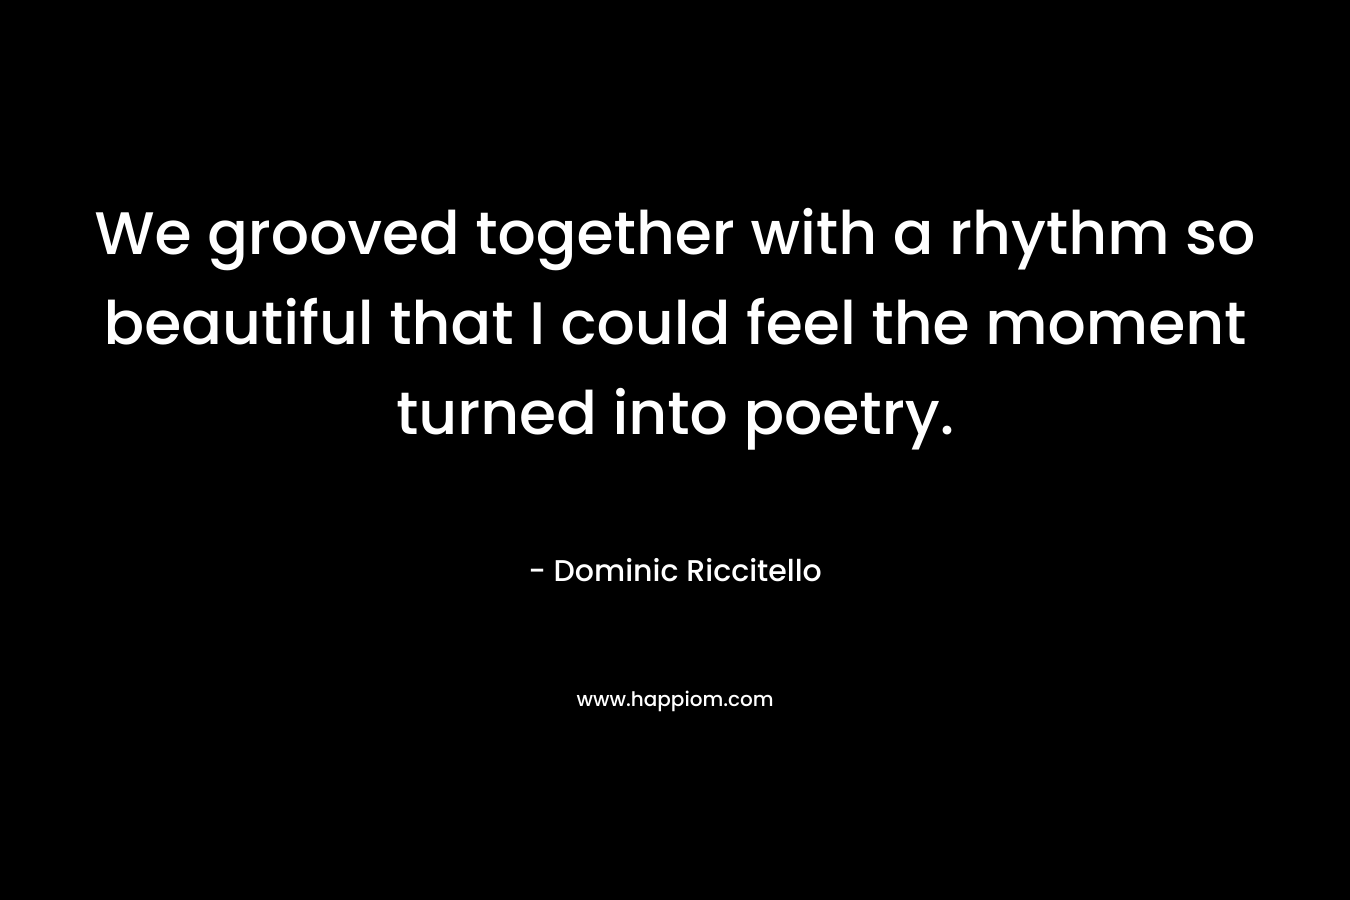 We grooved together with a rhythm so beautiful that I could feel the moment turned into poetry.